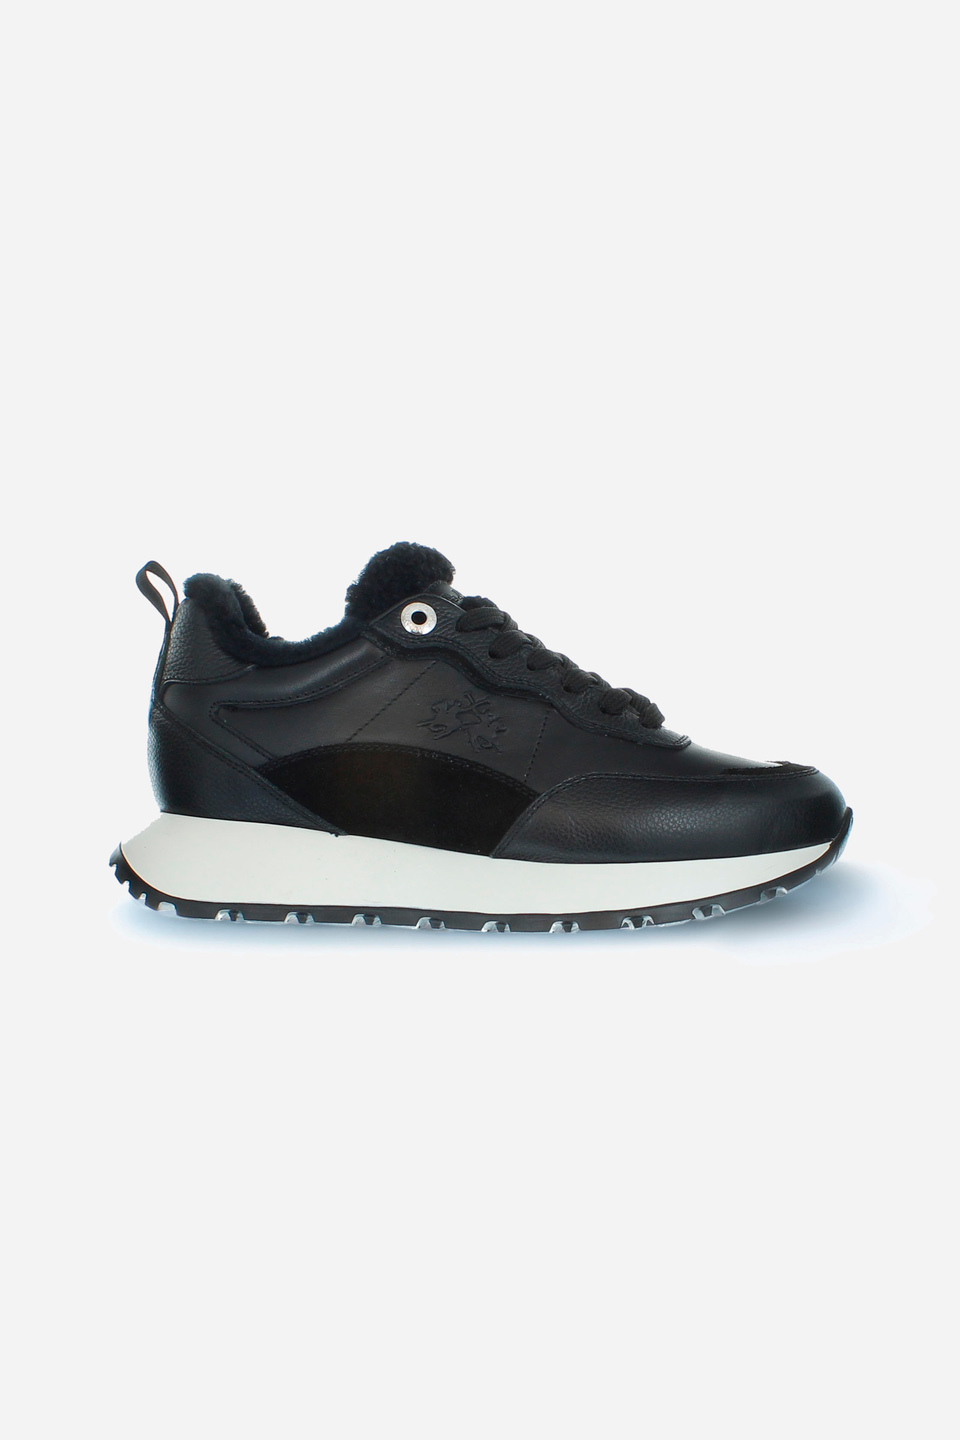 Women's trainer made of soft tumbled leather | La Martina - Official Online Shop